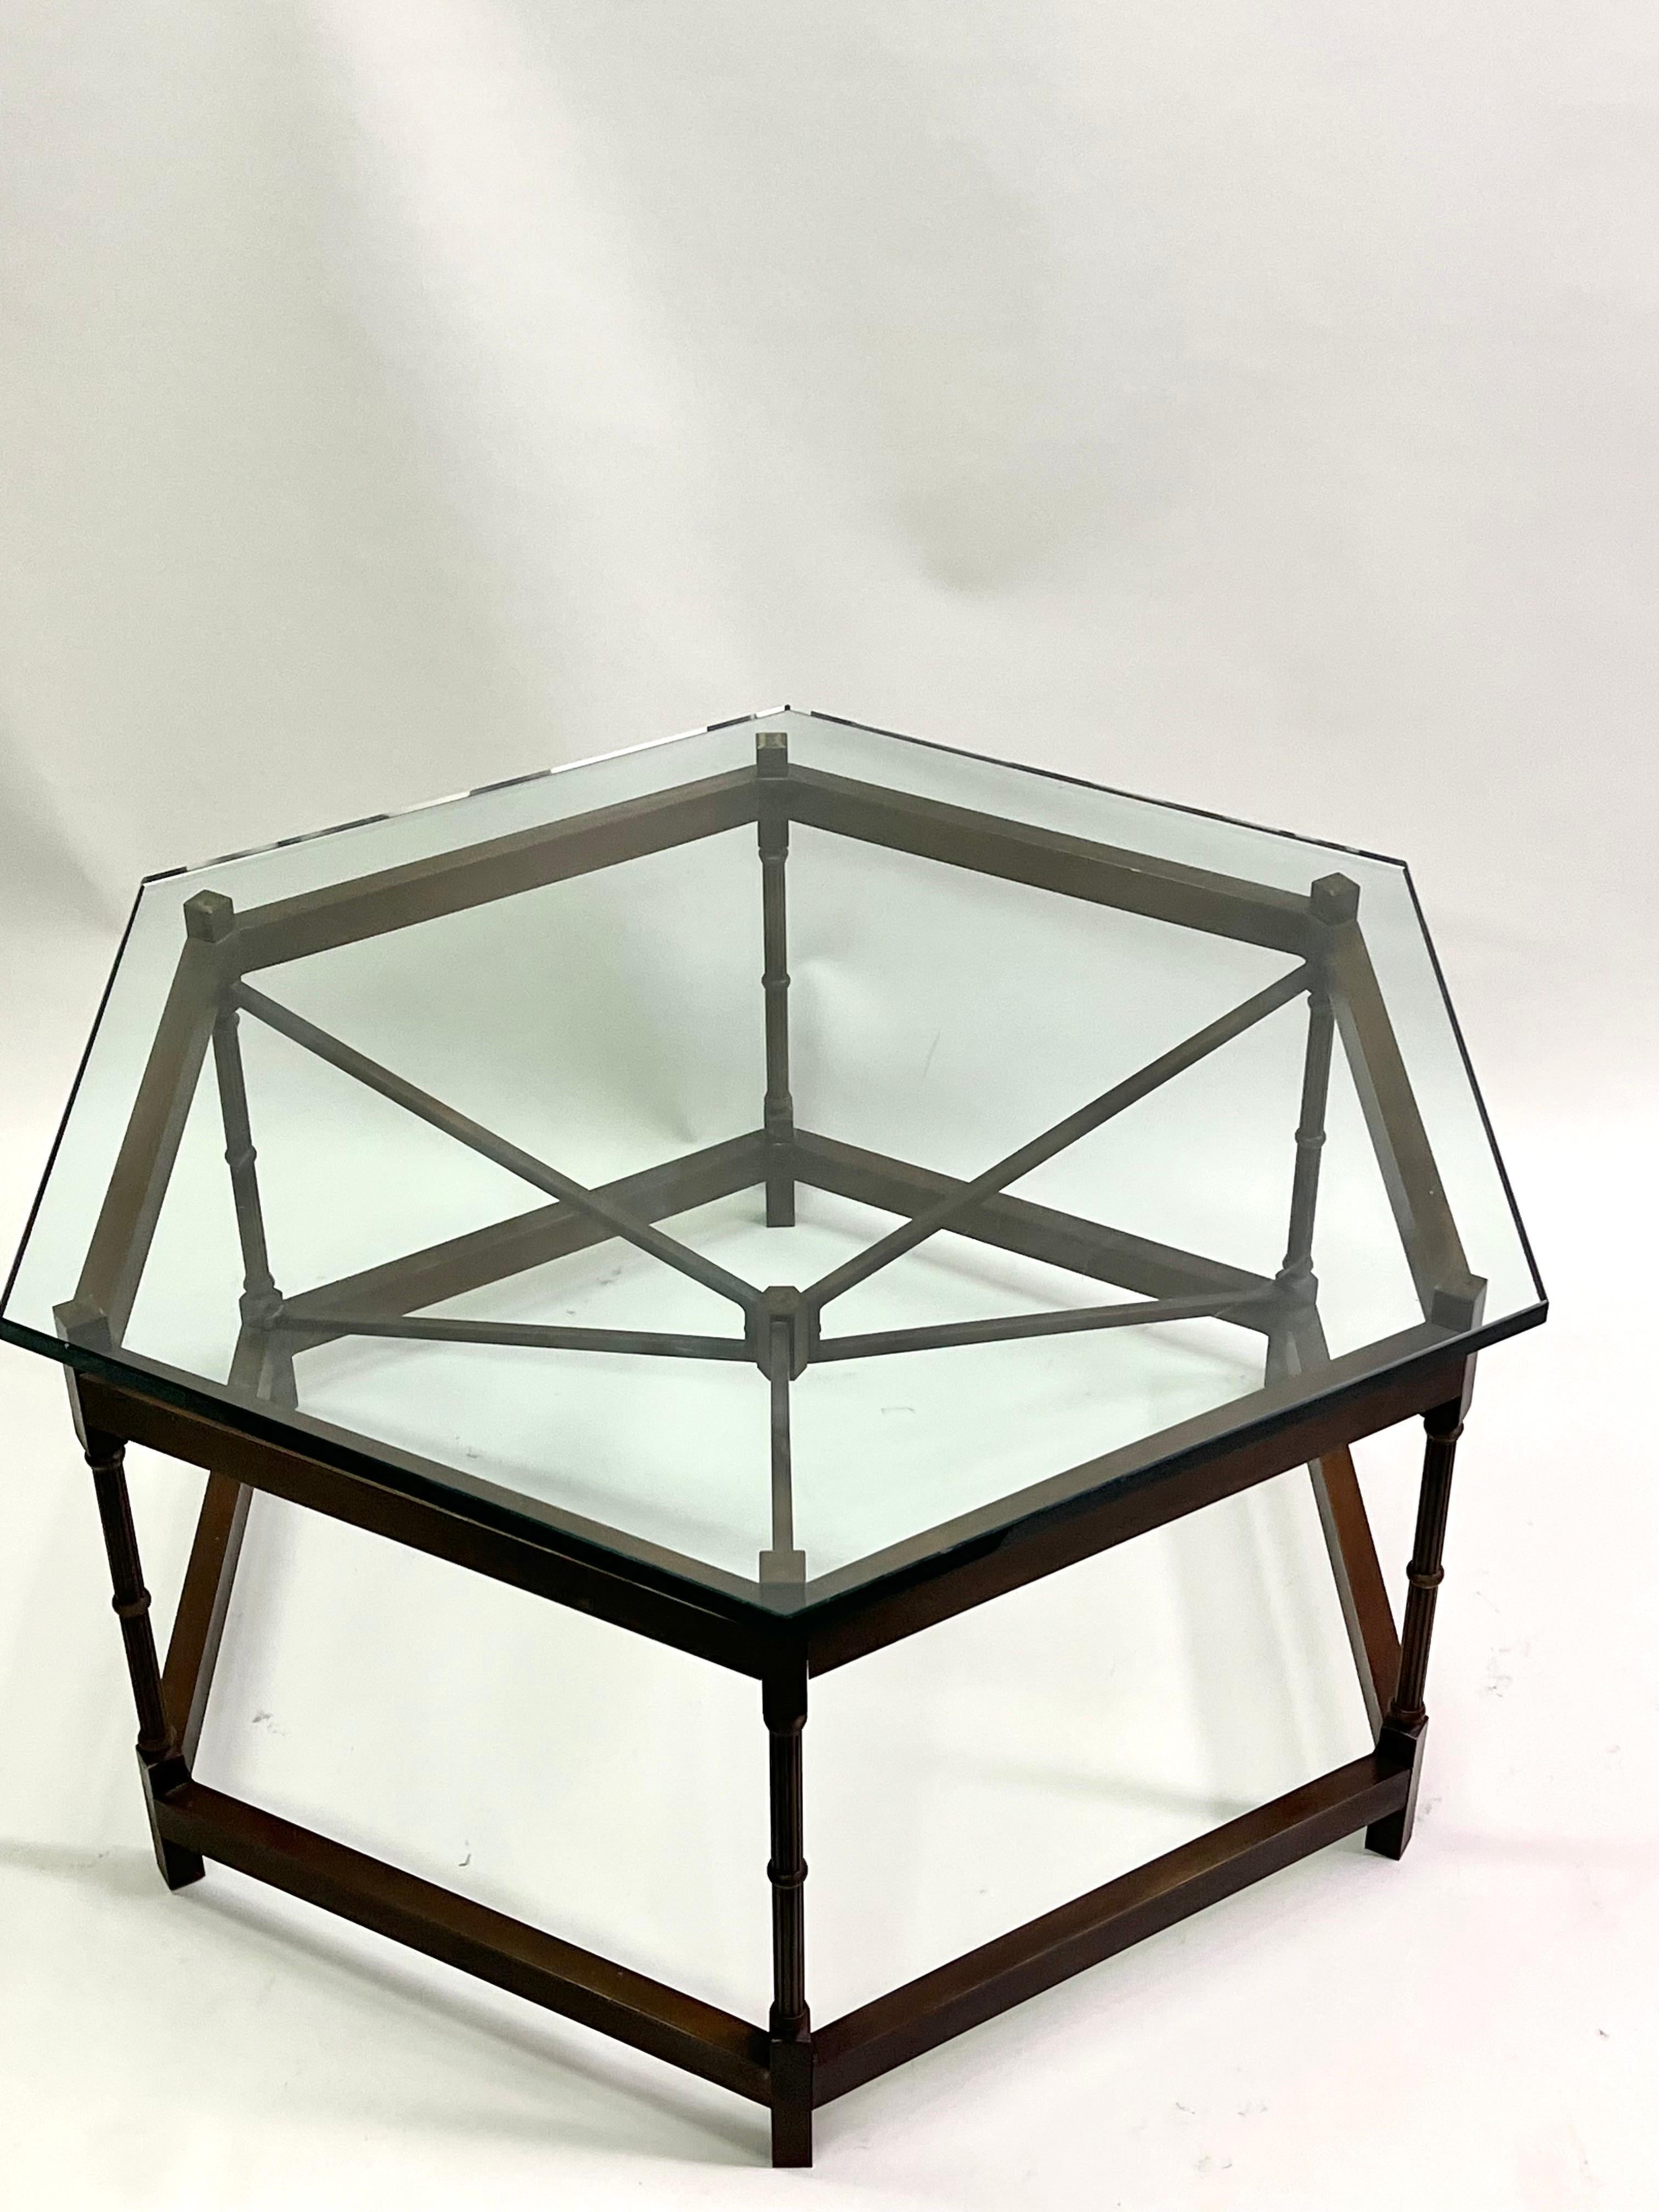 Hand-Crafted French Modern Neoclassical Hexagonal Bronze Cocktail Table, Poillerat & Arbus For Sale